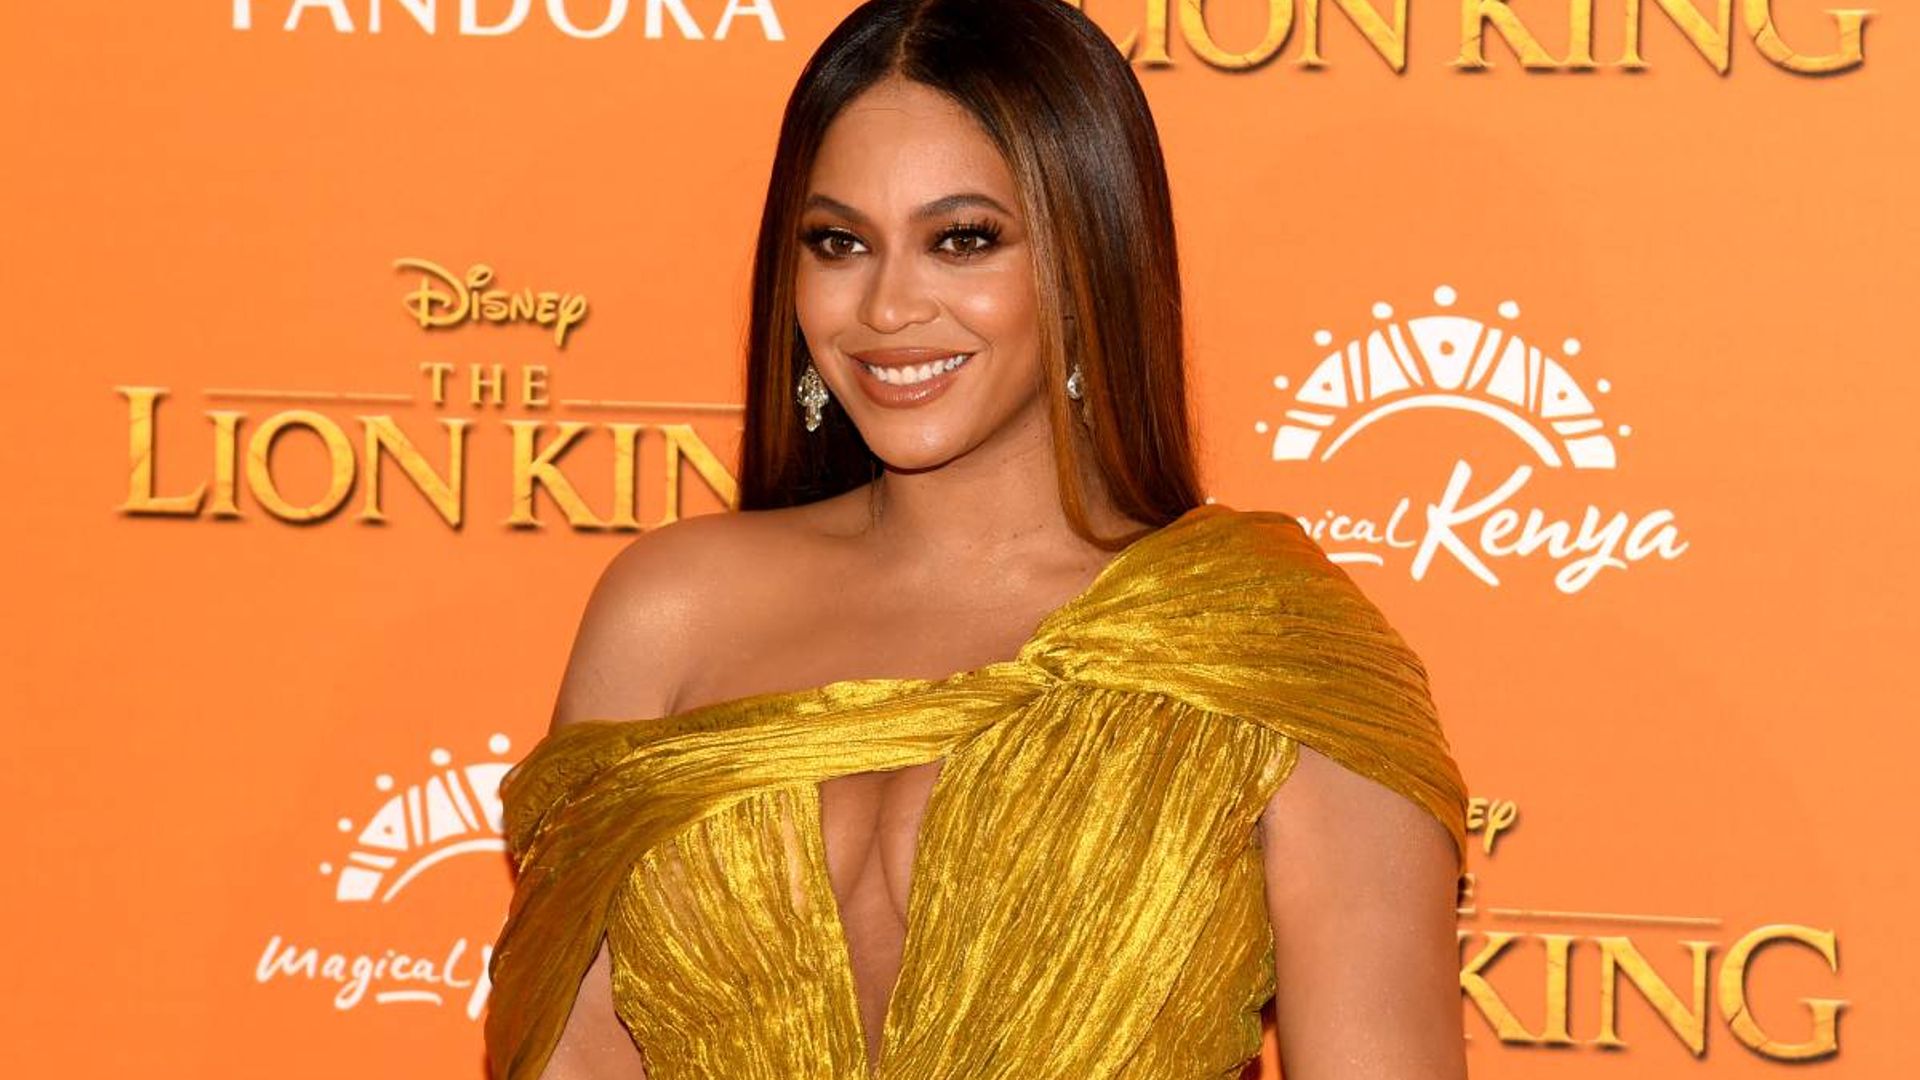 Beyoncé’s stunning summery date night mini dress had an accessory you would never expect